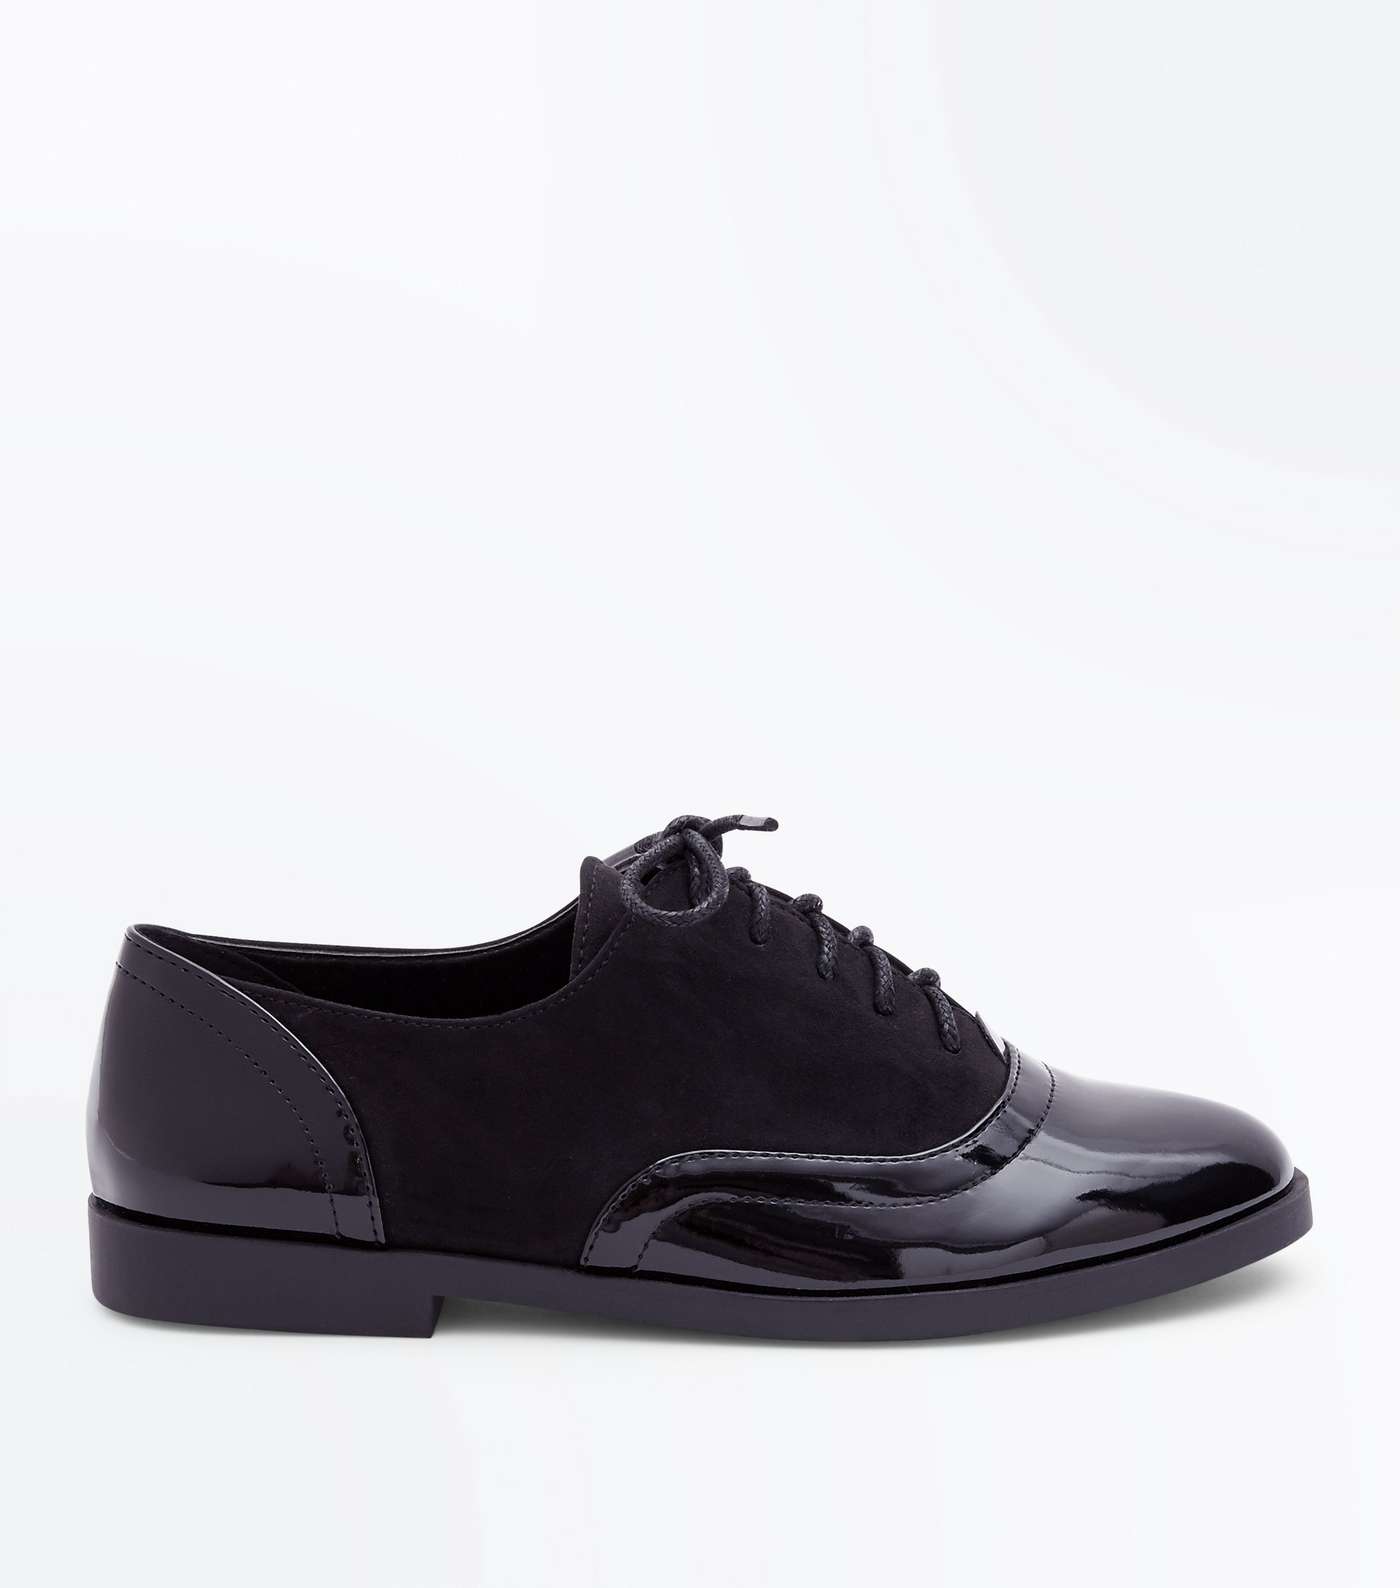 Girls Black Patent Panel Lace Up Brogues